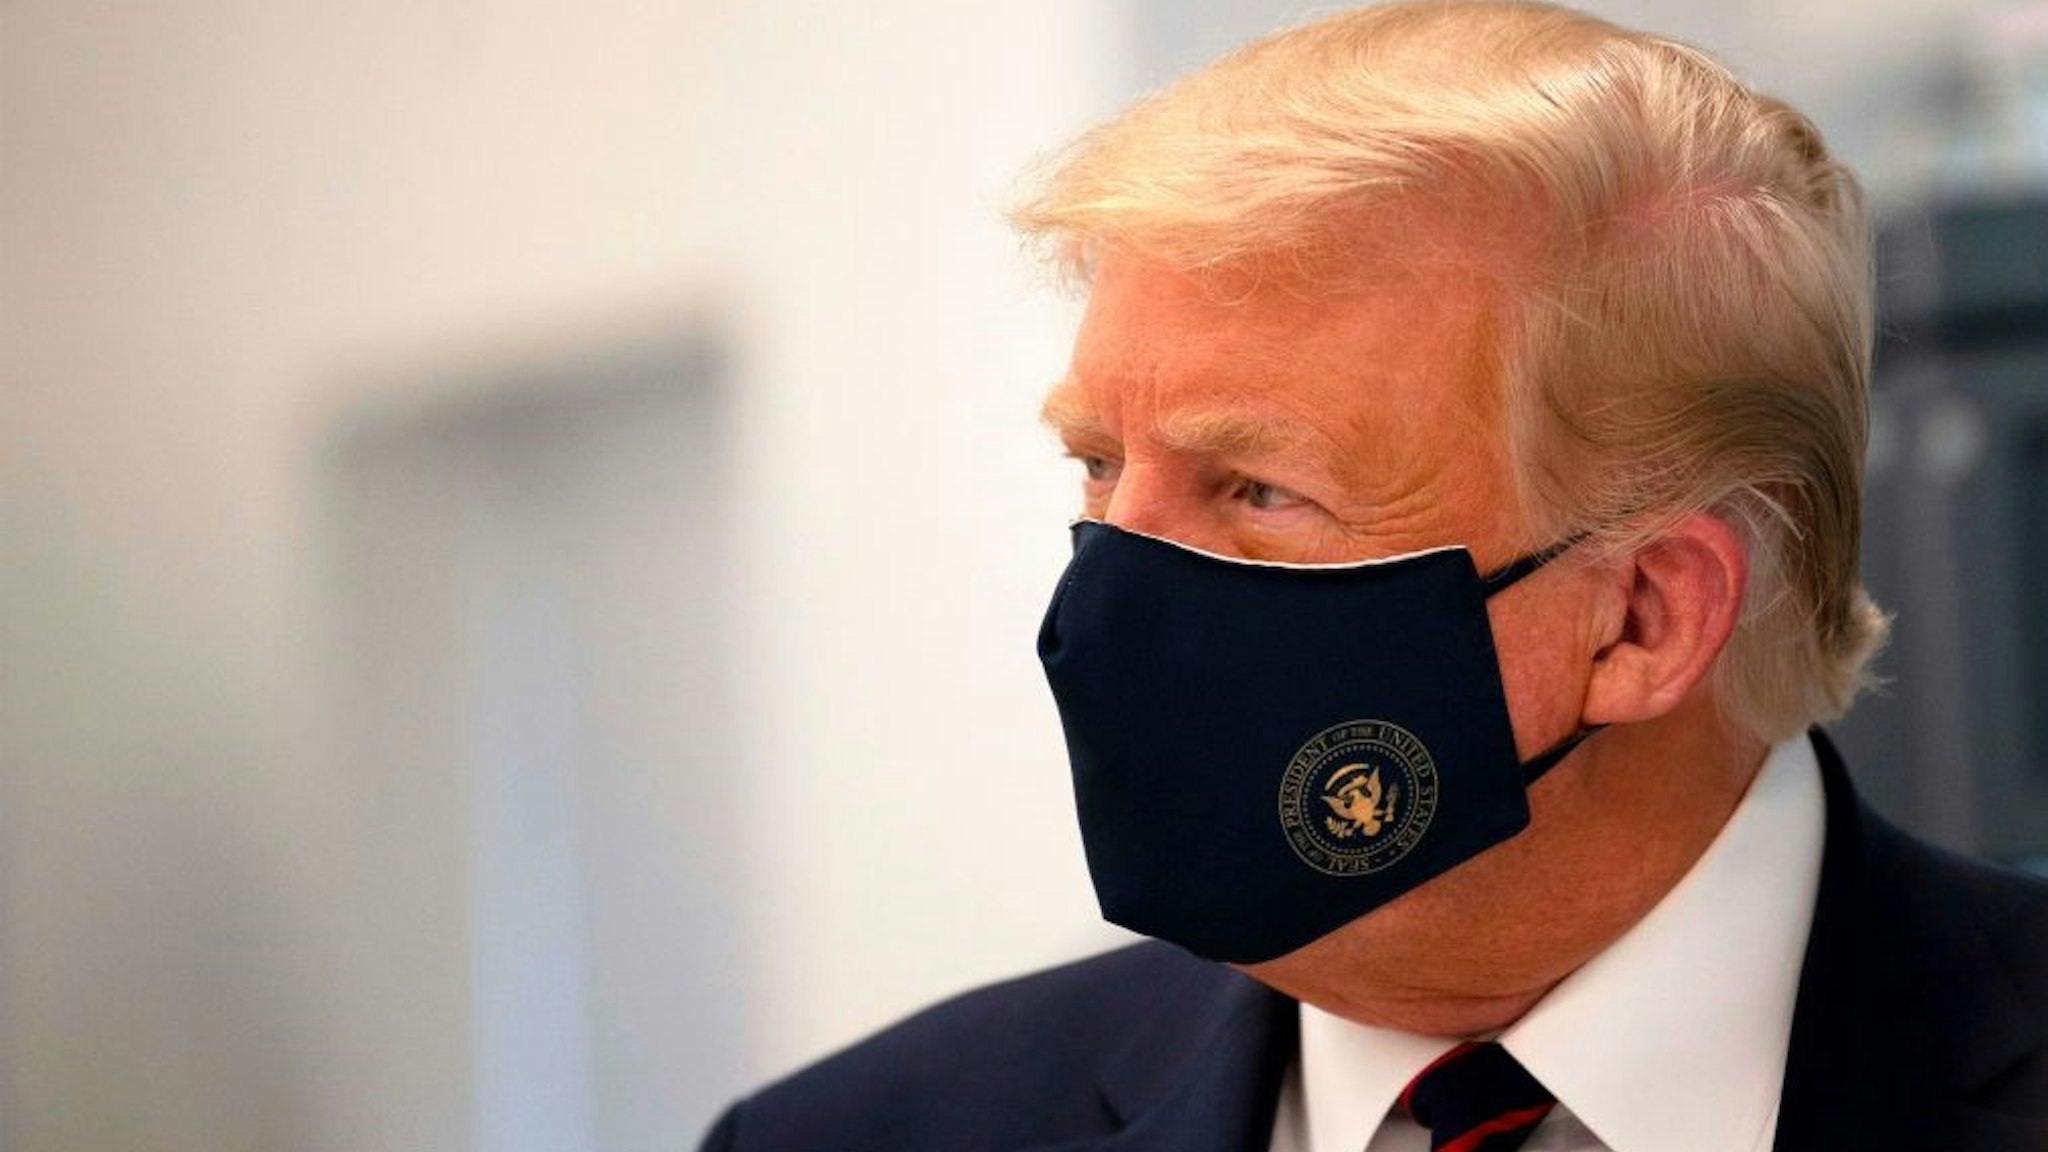 TOPSHOT - US President Donald Trump wears a mask as he tours a lab where they are making components for a potential vaccine at the Bioprocess Innovation Center at Fujifilm Diosynth Biotechnologies in Morrisville, North Carolina on July 27, 2020. (Photo by JIM WATSON / AFP) (Photo by